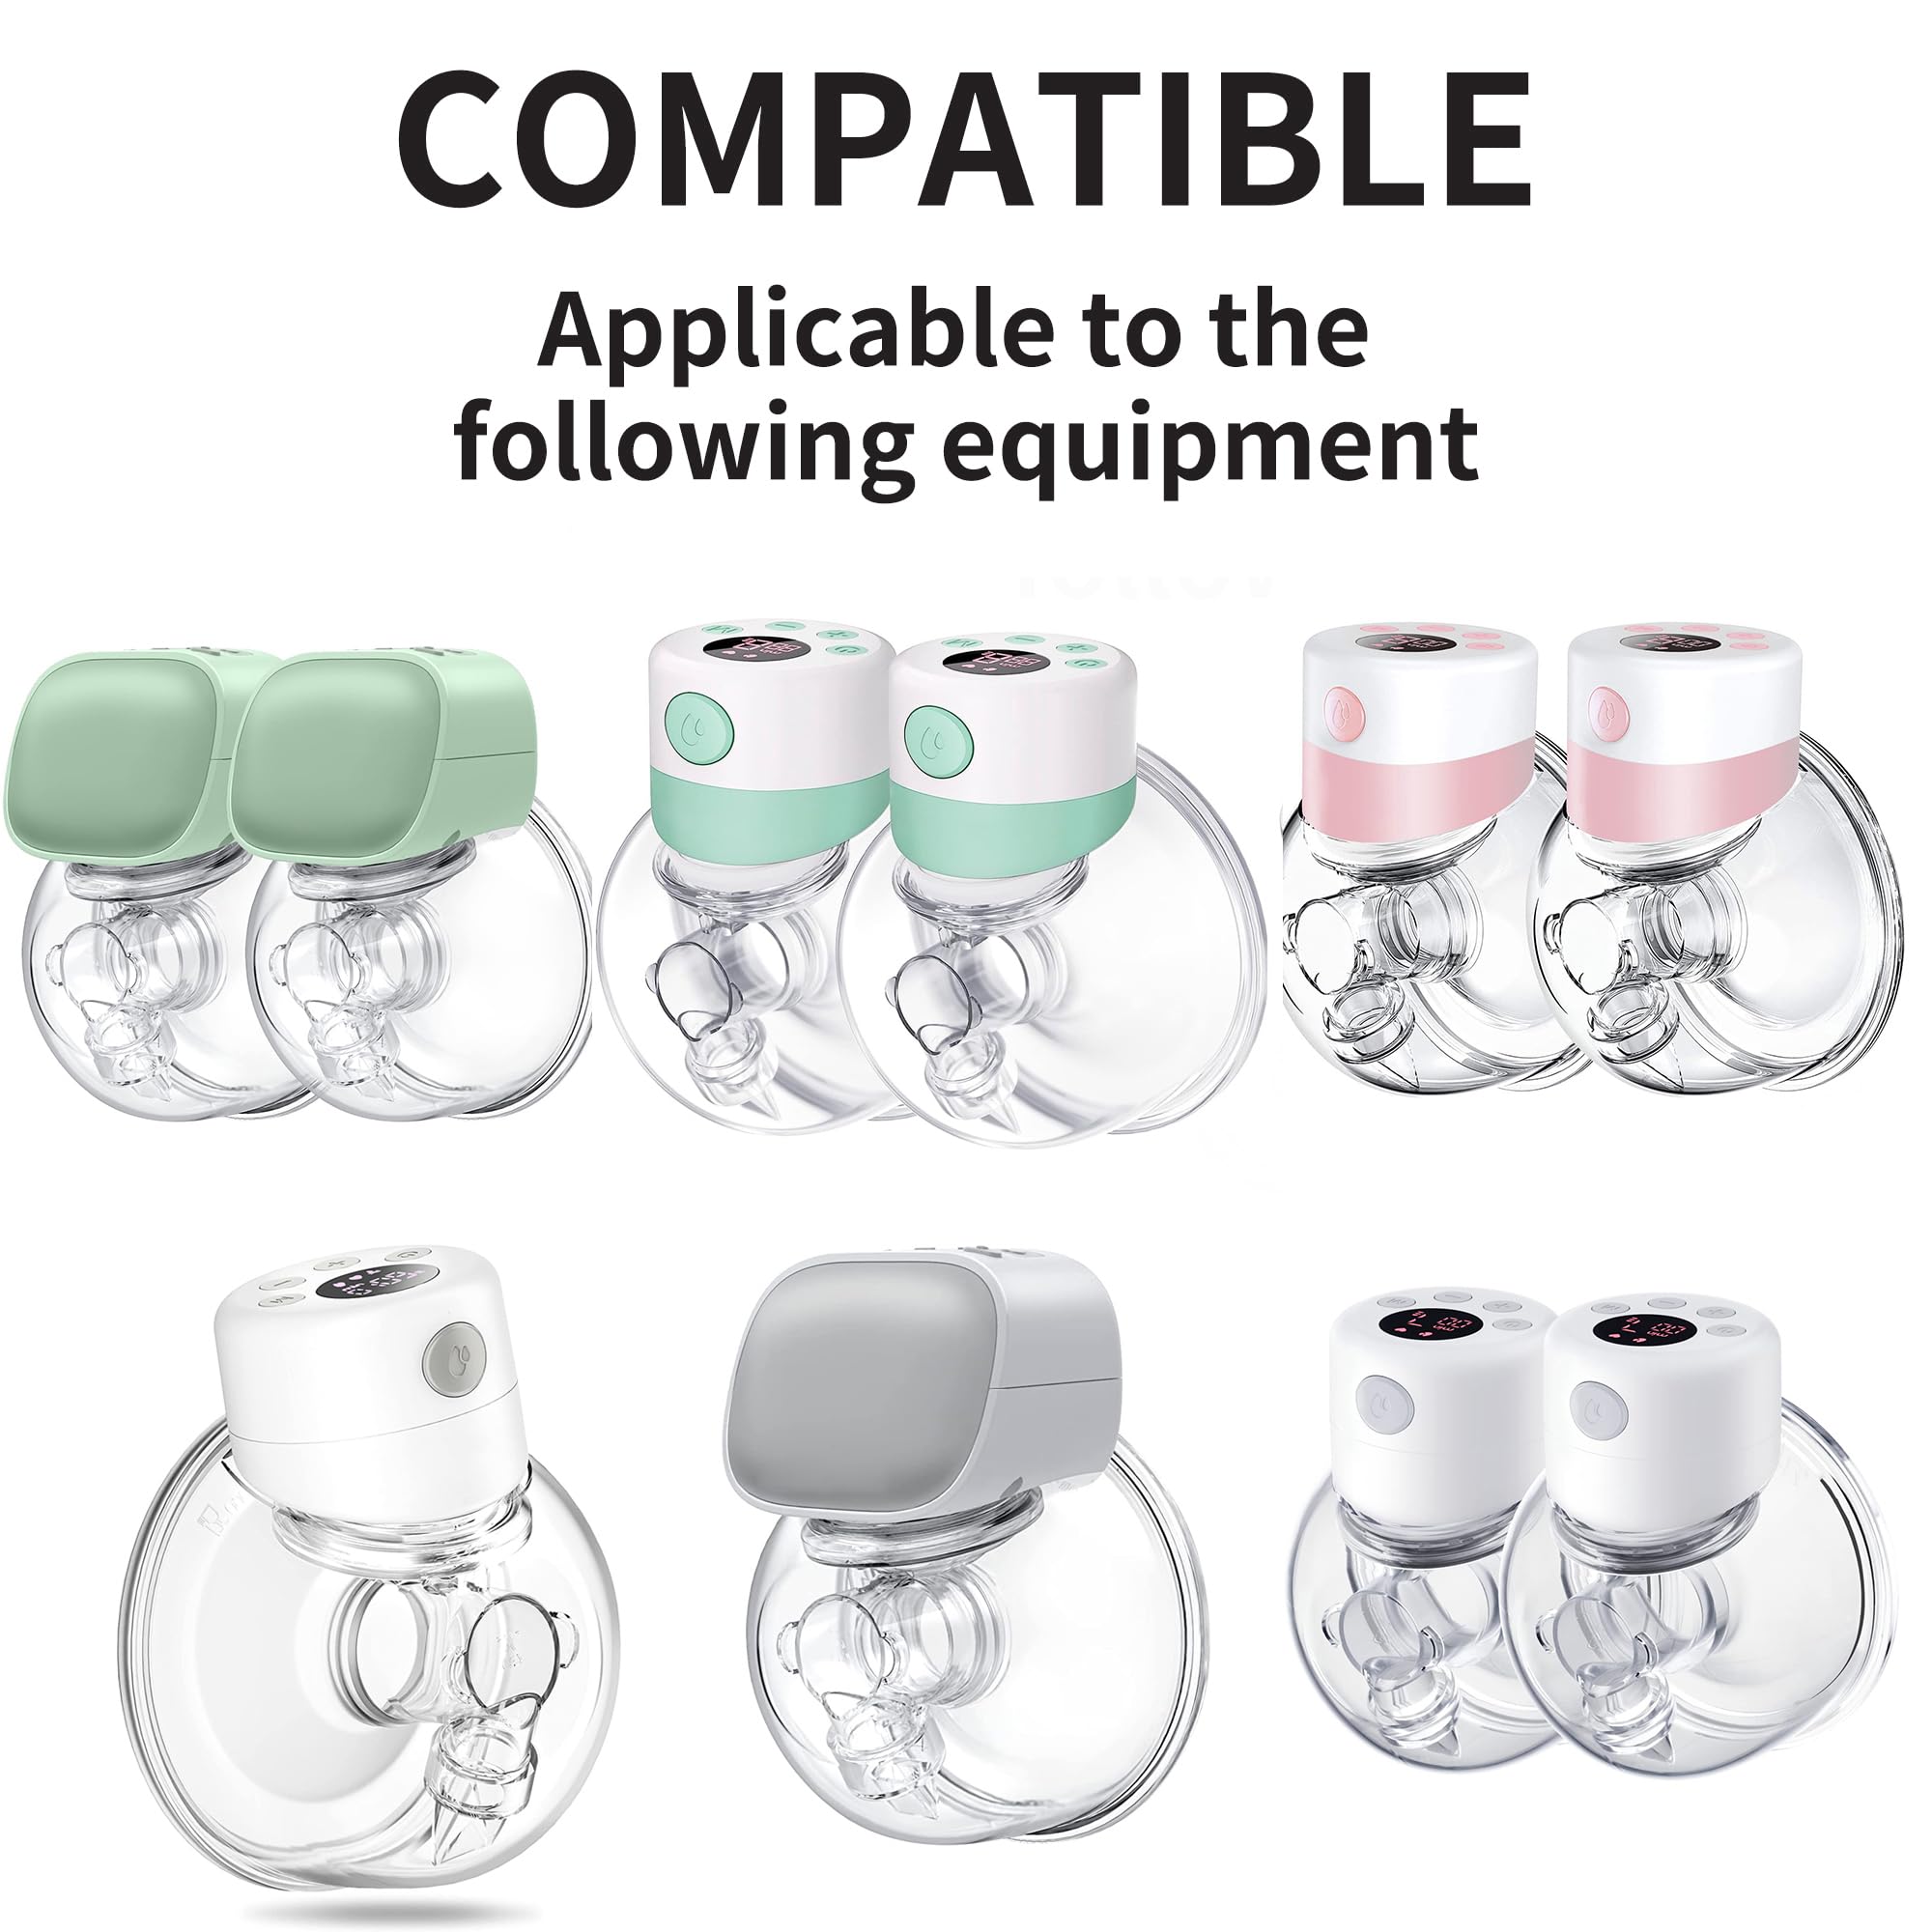 Gotocut S9 S12 Duckbill Valves Silicone Diaphragm, Breast Pump Replacements Parts for TSRETE/Momcozy (6 Pieces Set)